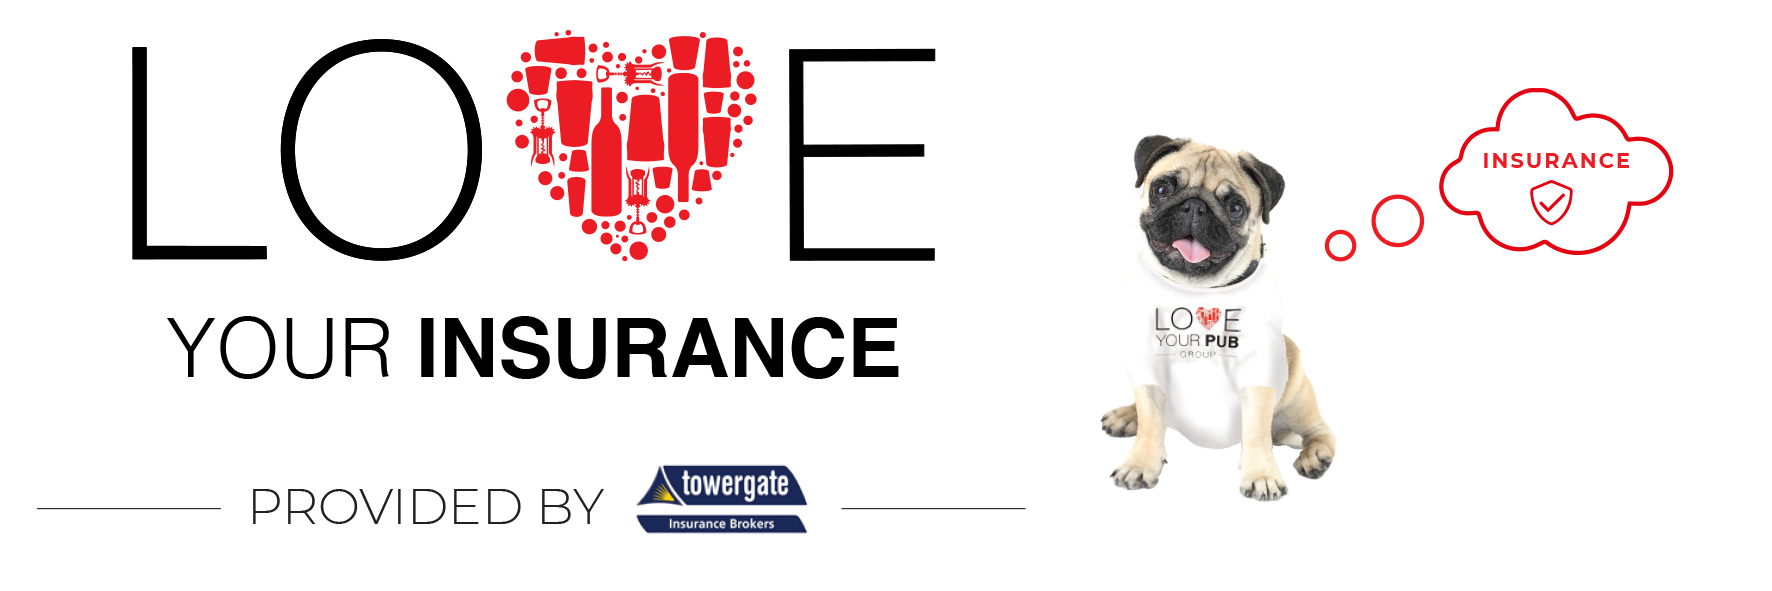 Love Your Insurance - Pub Support Graphic Internal